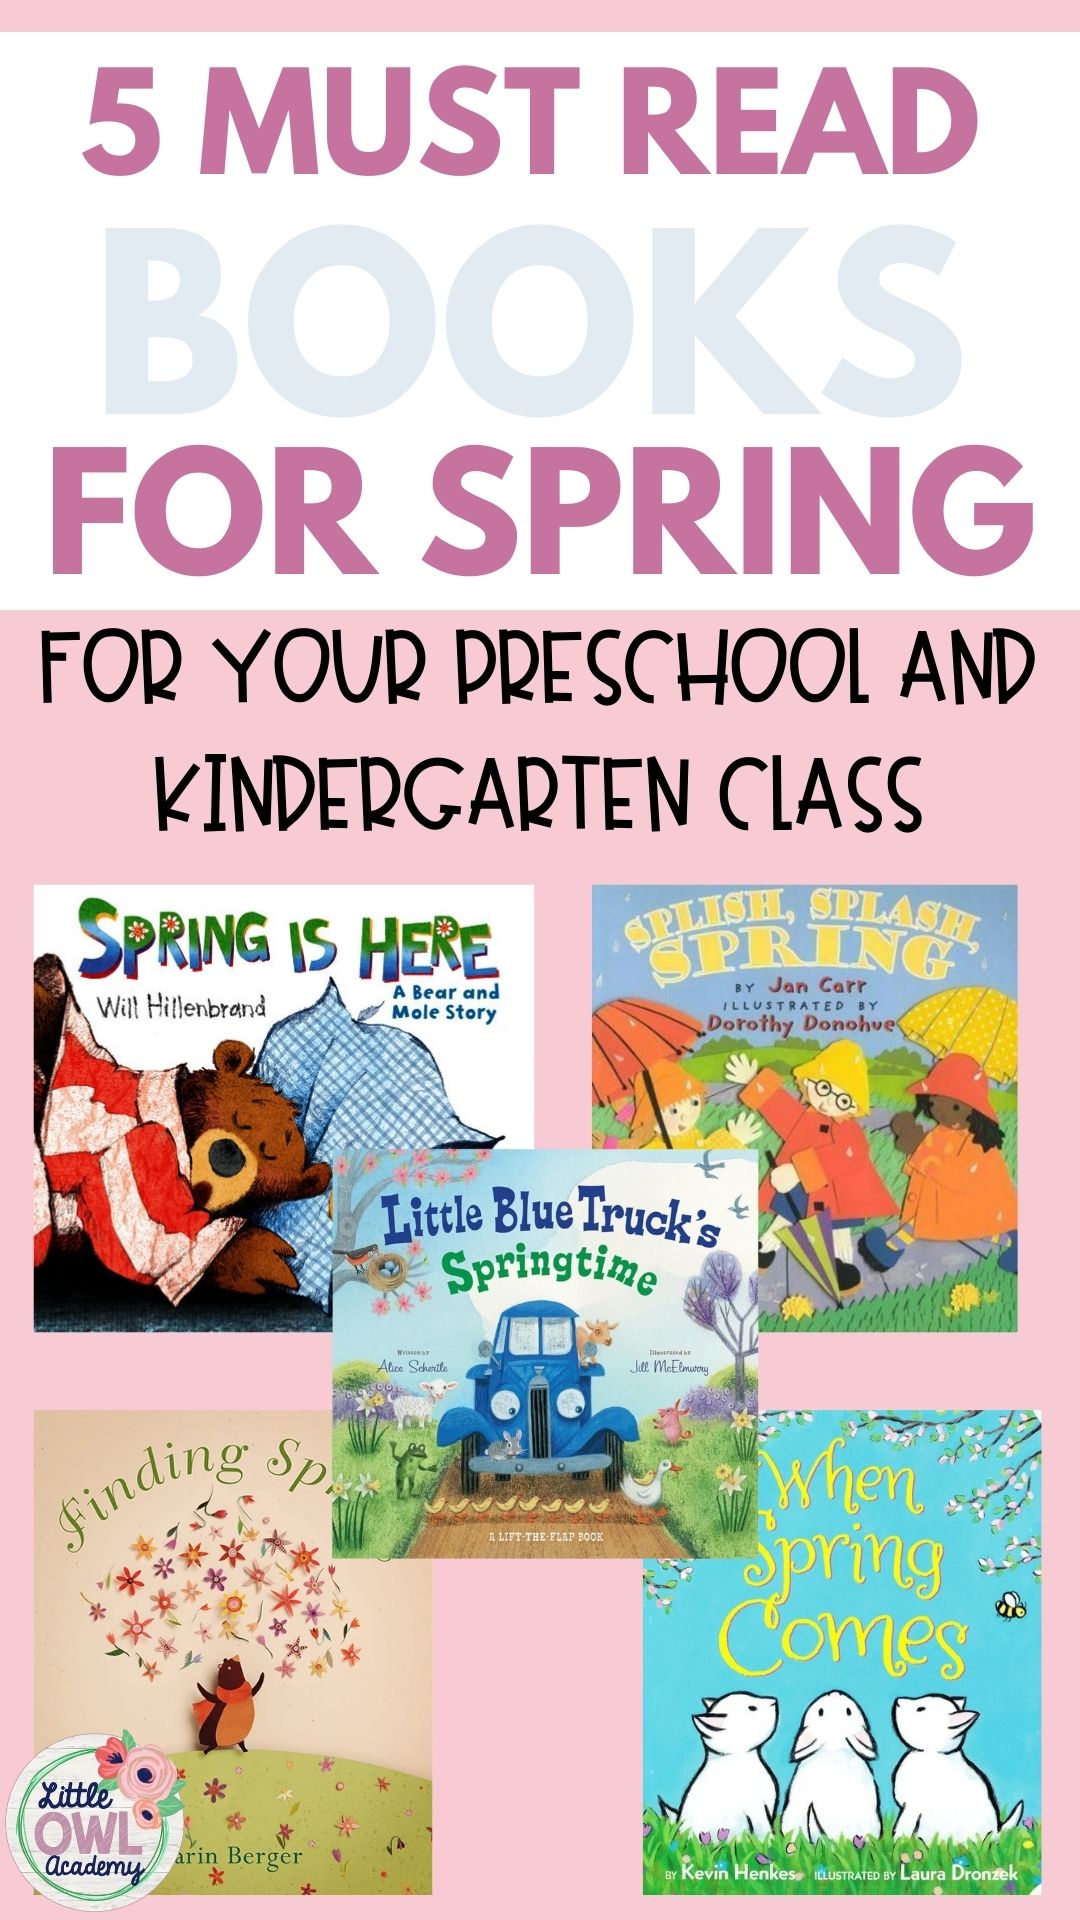 5 Must Read Books for Preschool and Kindergarten this Spring